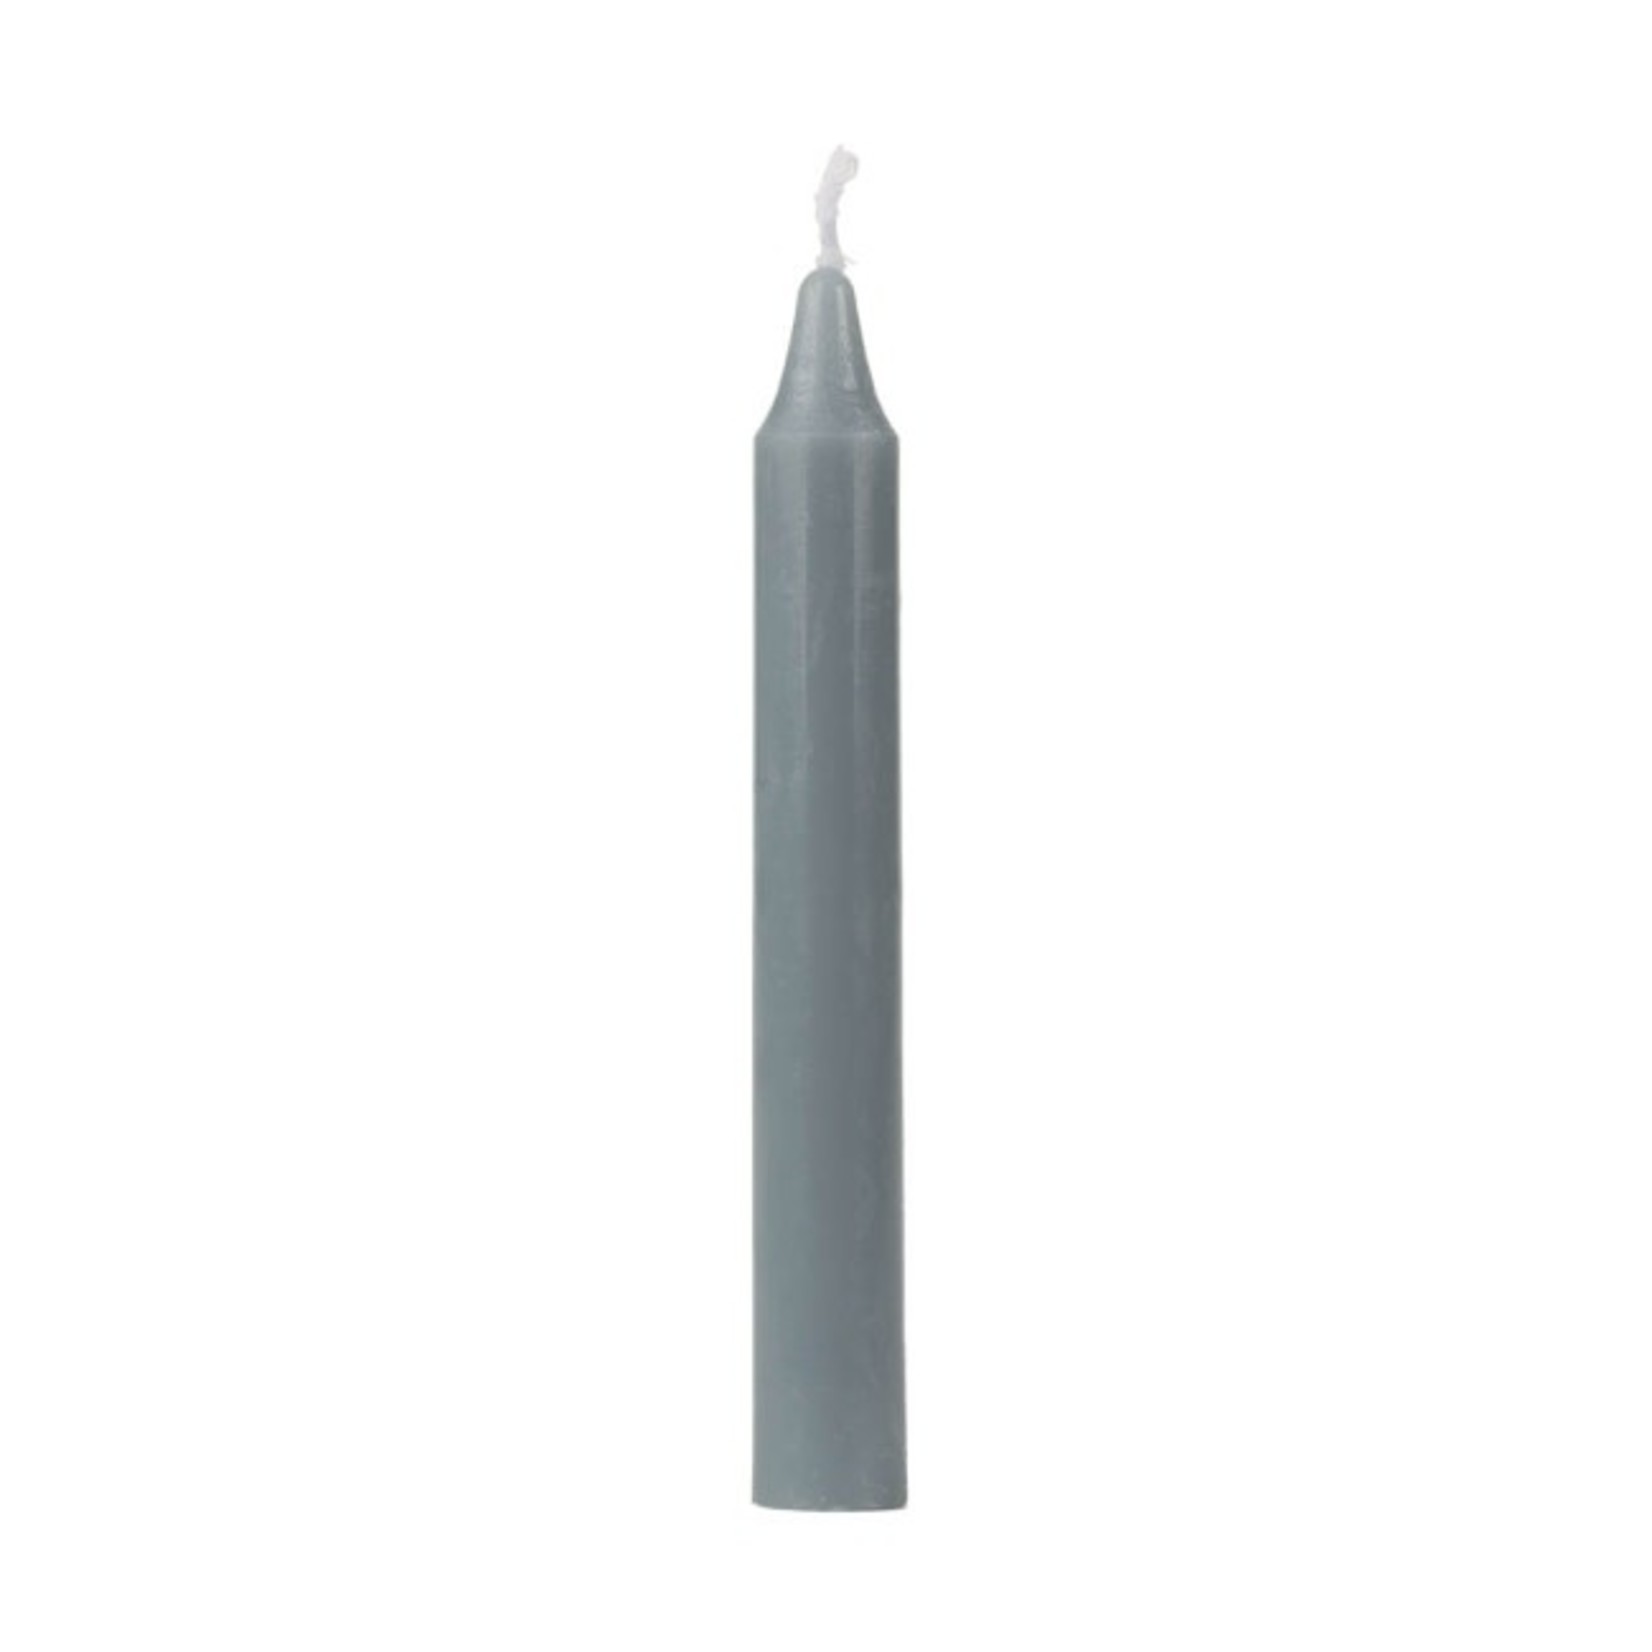 Biedermann & Sons 4” Spell Candle